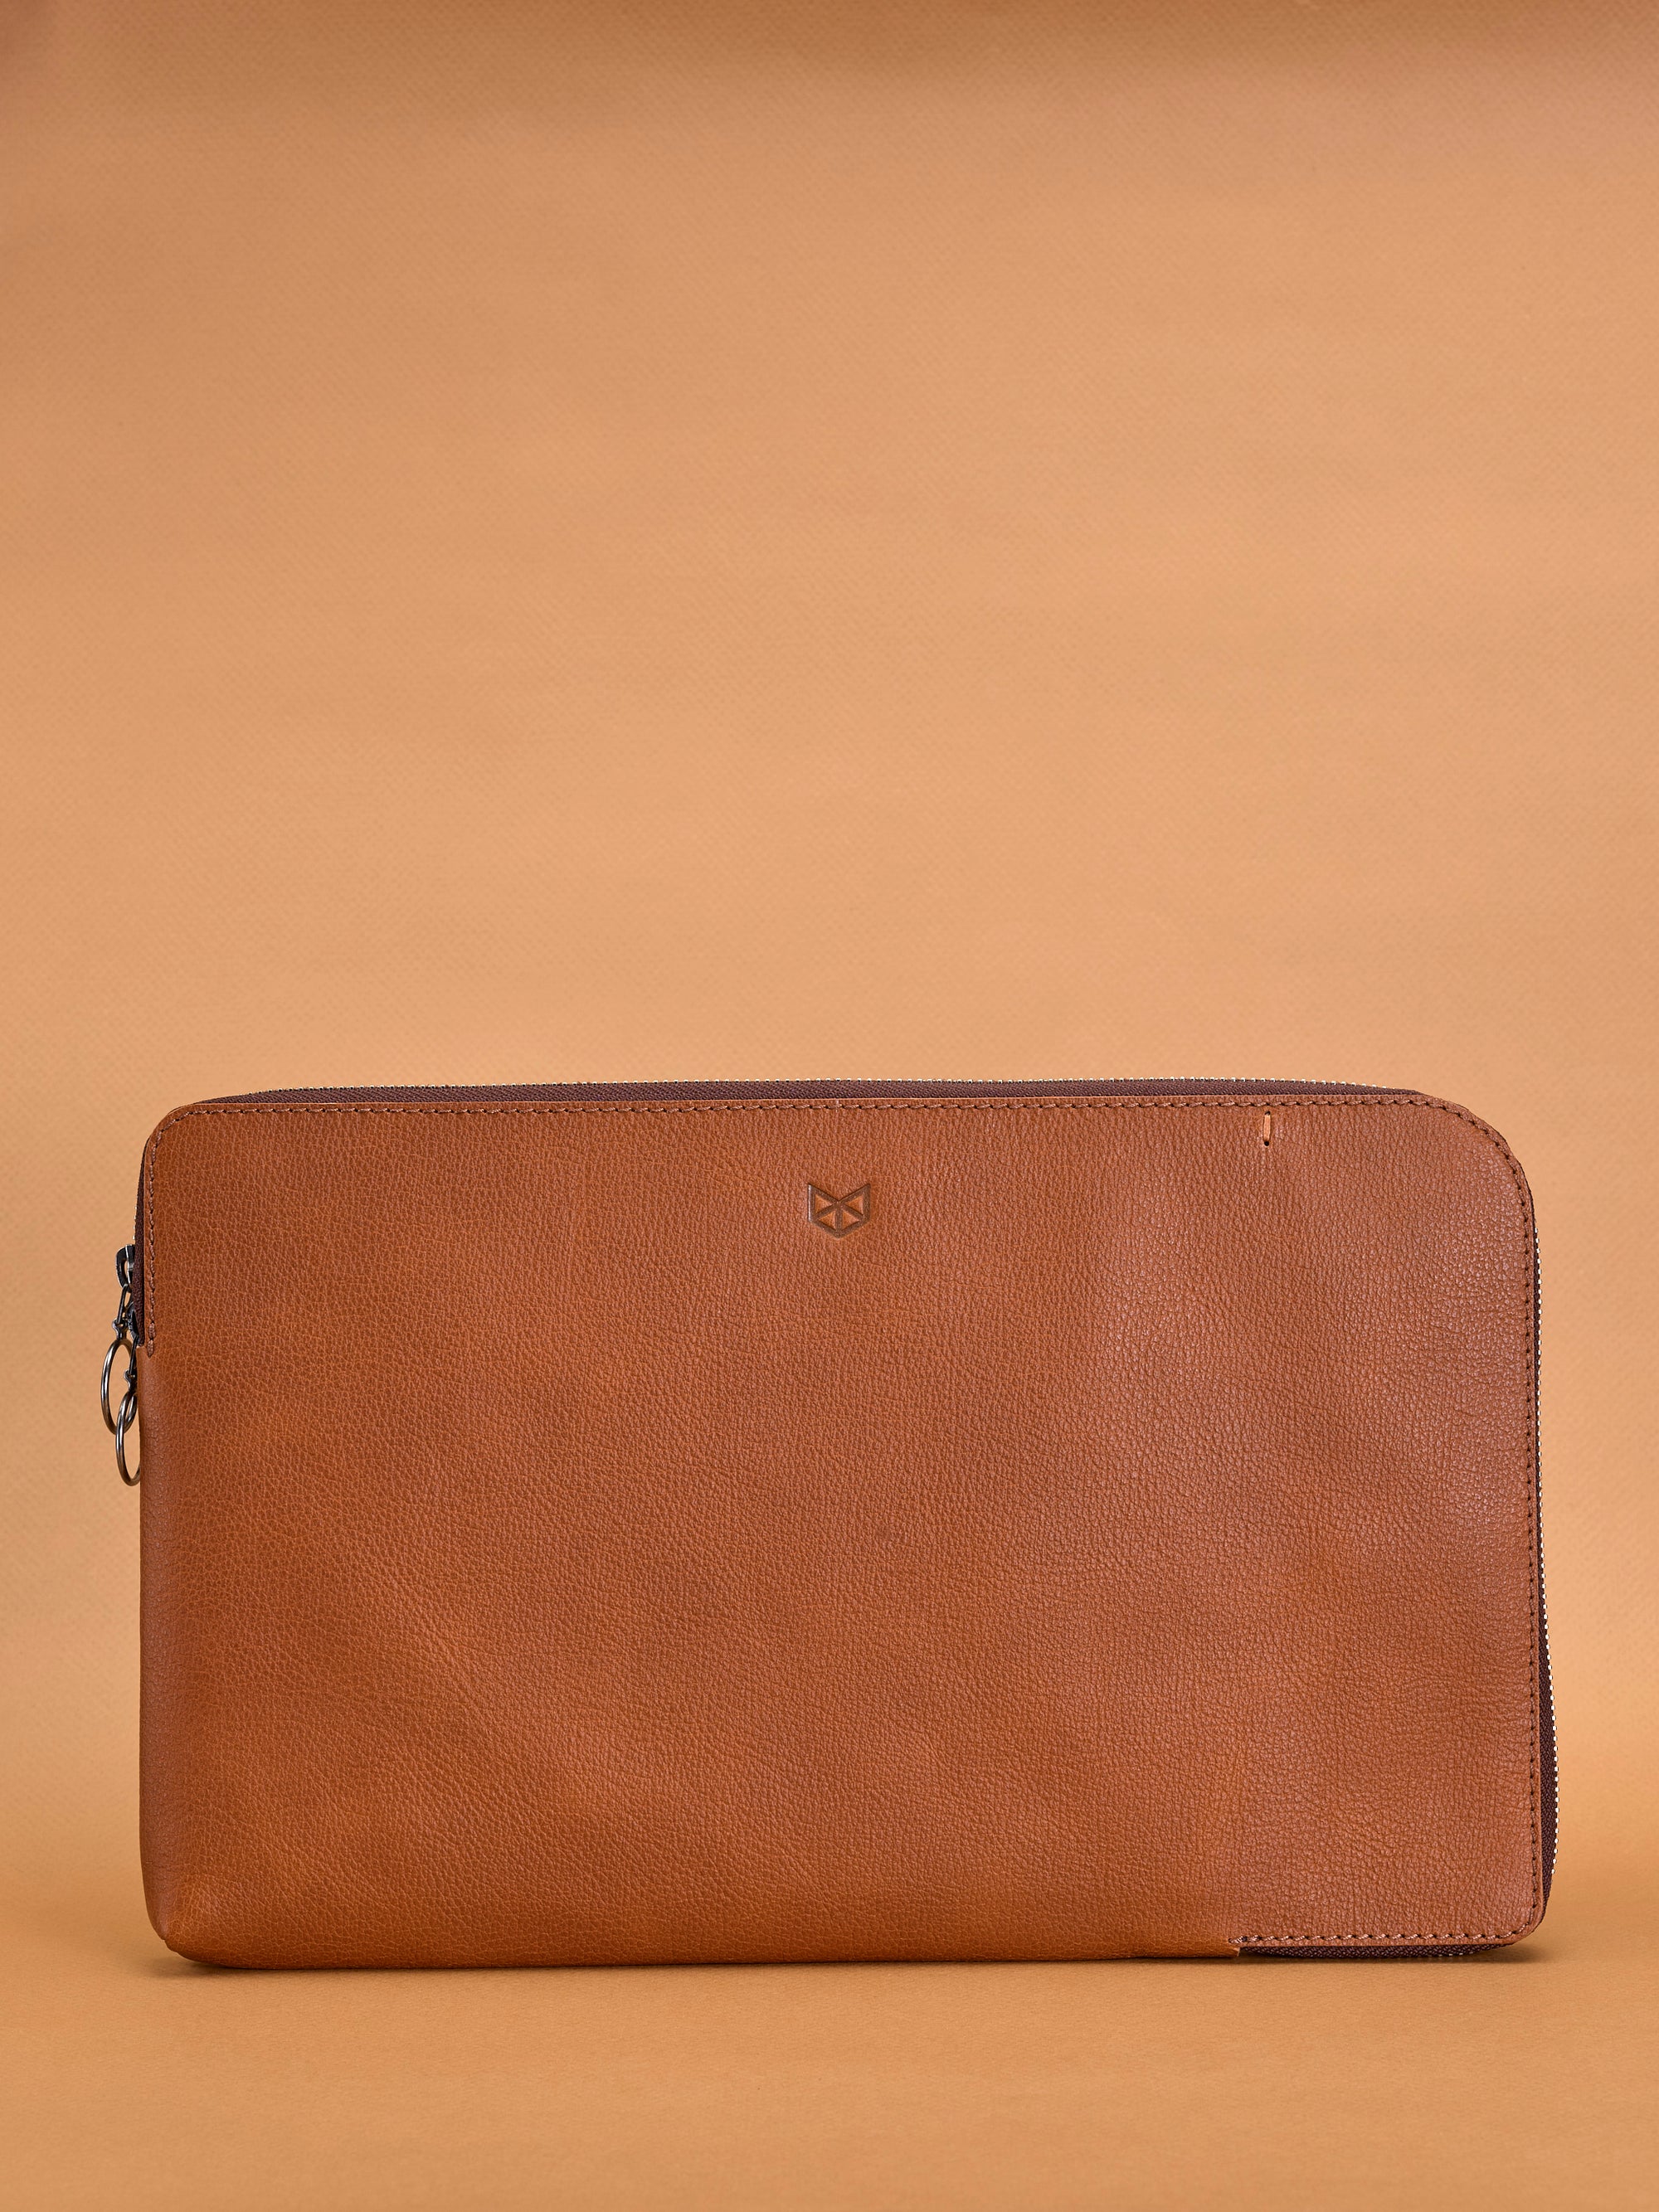 Front view. Draftsman 6 iPad Case Tan, iPad Pro 11-inch, iPad Pro 12.9-inch, M1 Chip by Capra Leather